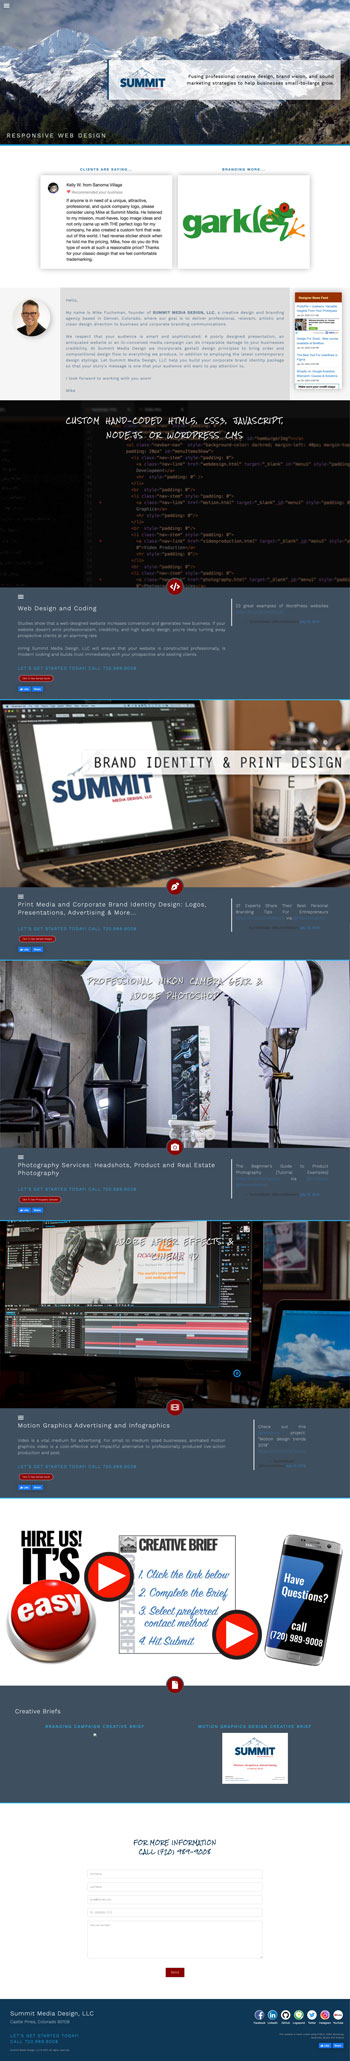 SMD-Responsive-site-html5-css3-java